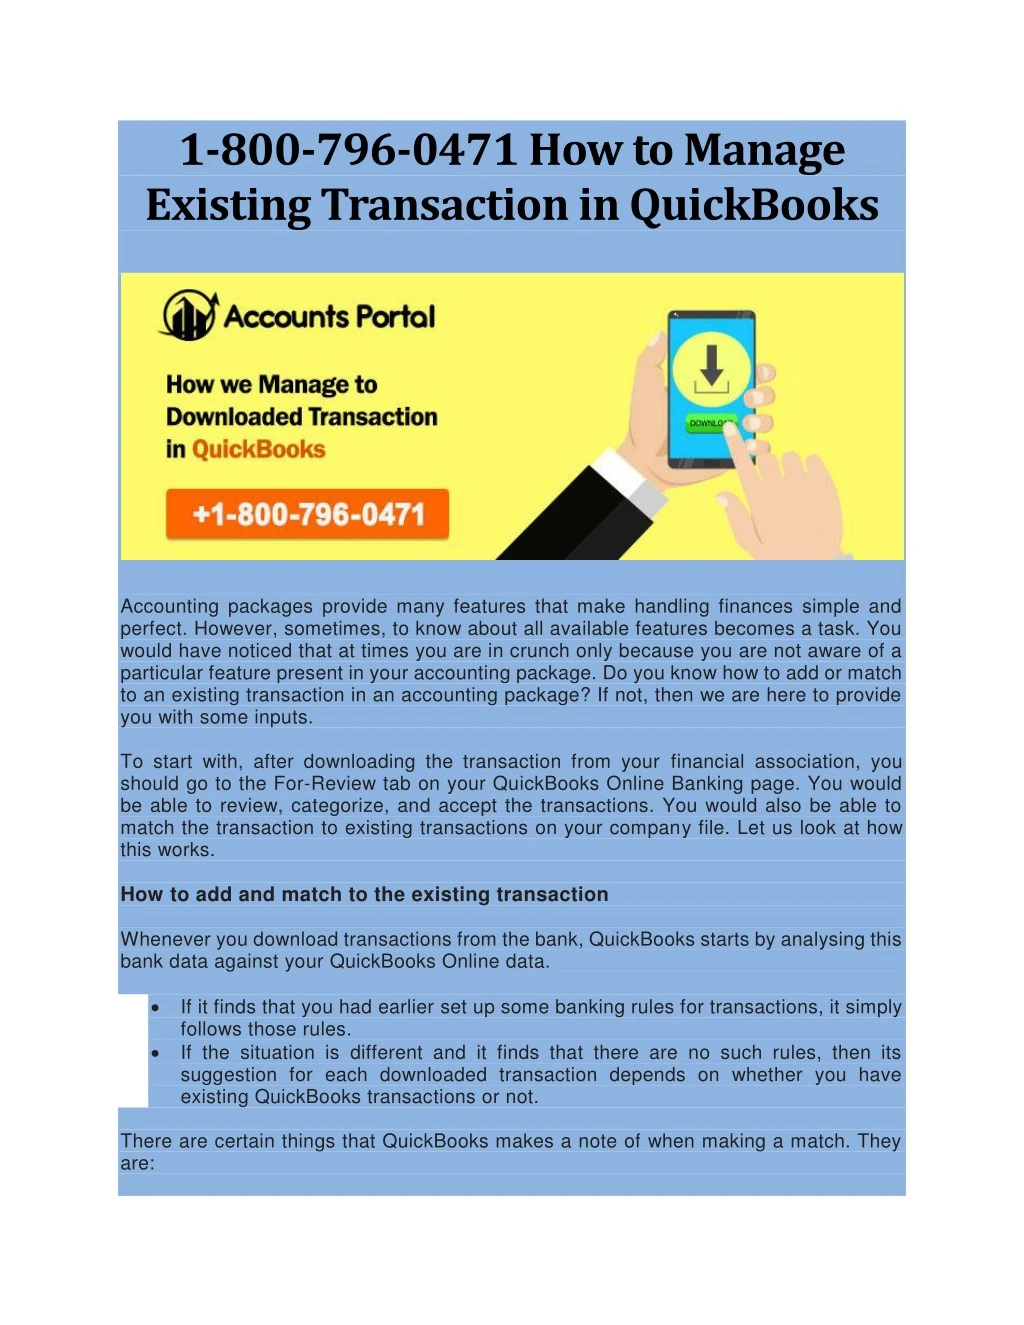 1 800 796 0471 how to manage existing transaction